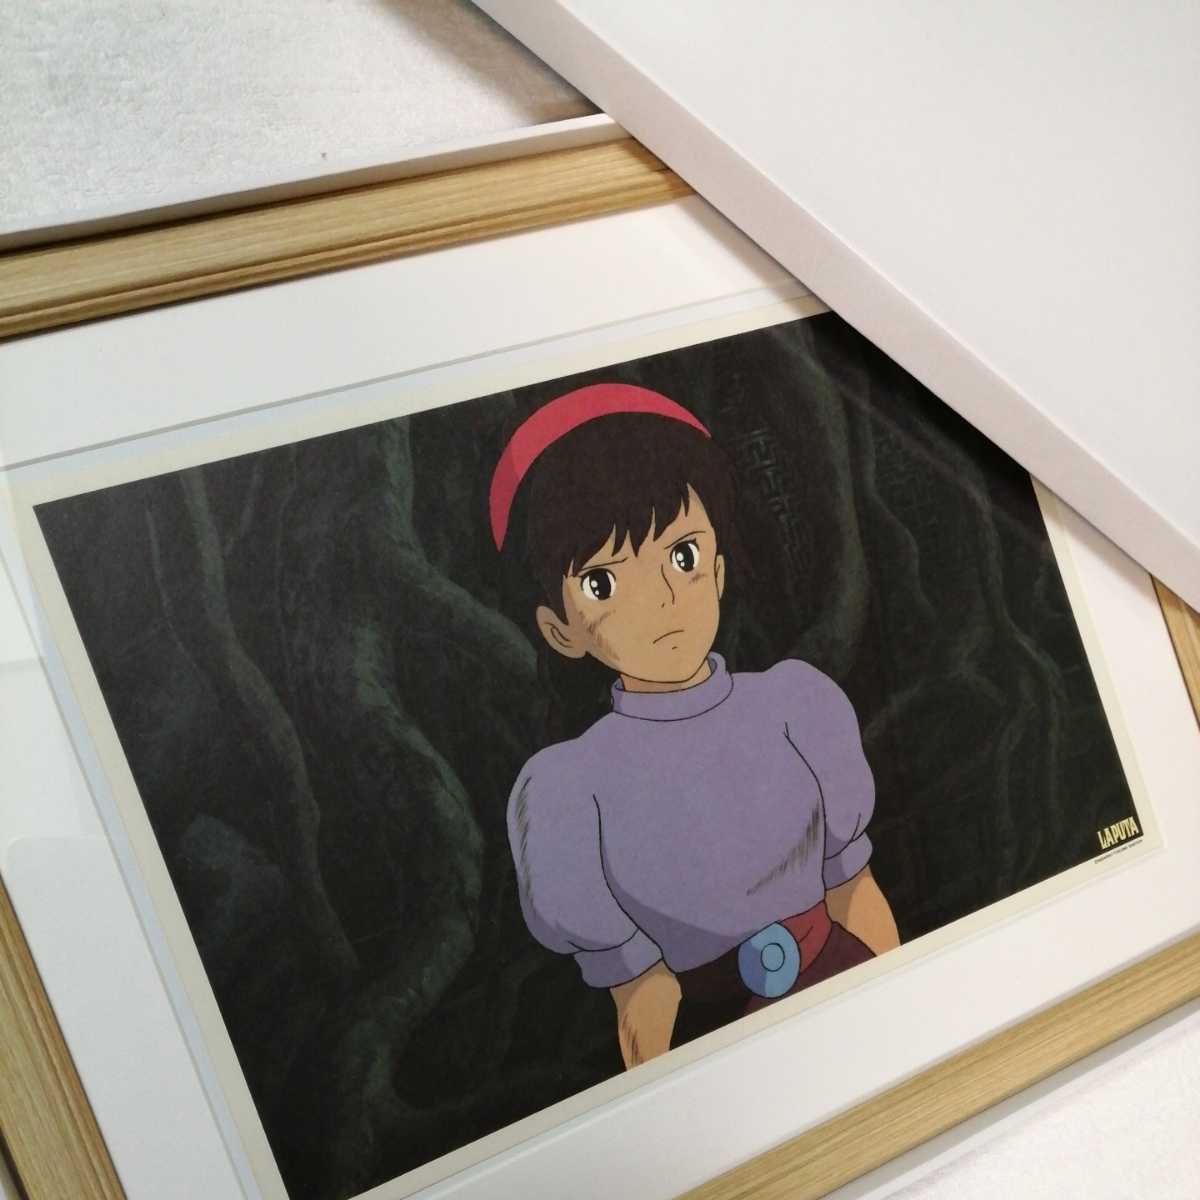 More than 30 years ago [At that time] Studio Ghibli: Castle in the Sky [Framed item] Poster, wall hanging painting, original reproduction, inspection) cel, postcard, Hayao Miyazaki g, comics, anime goods, others